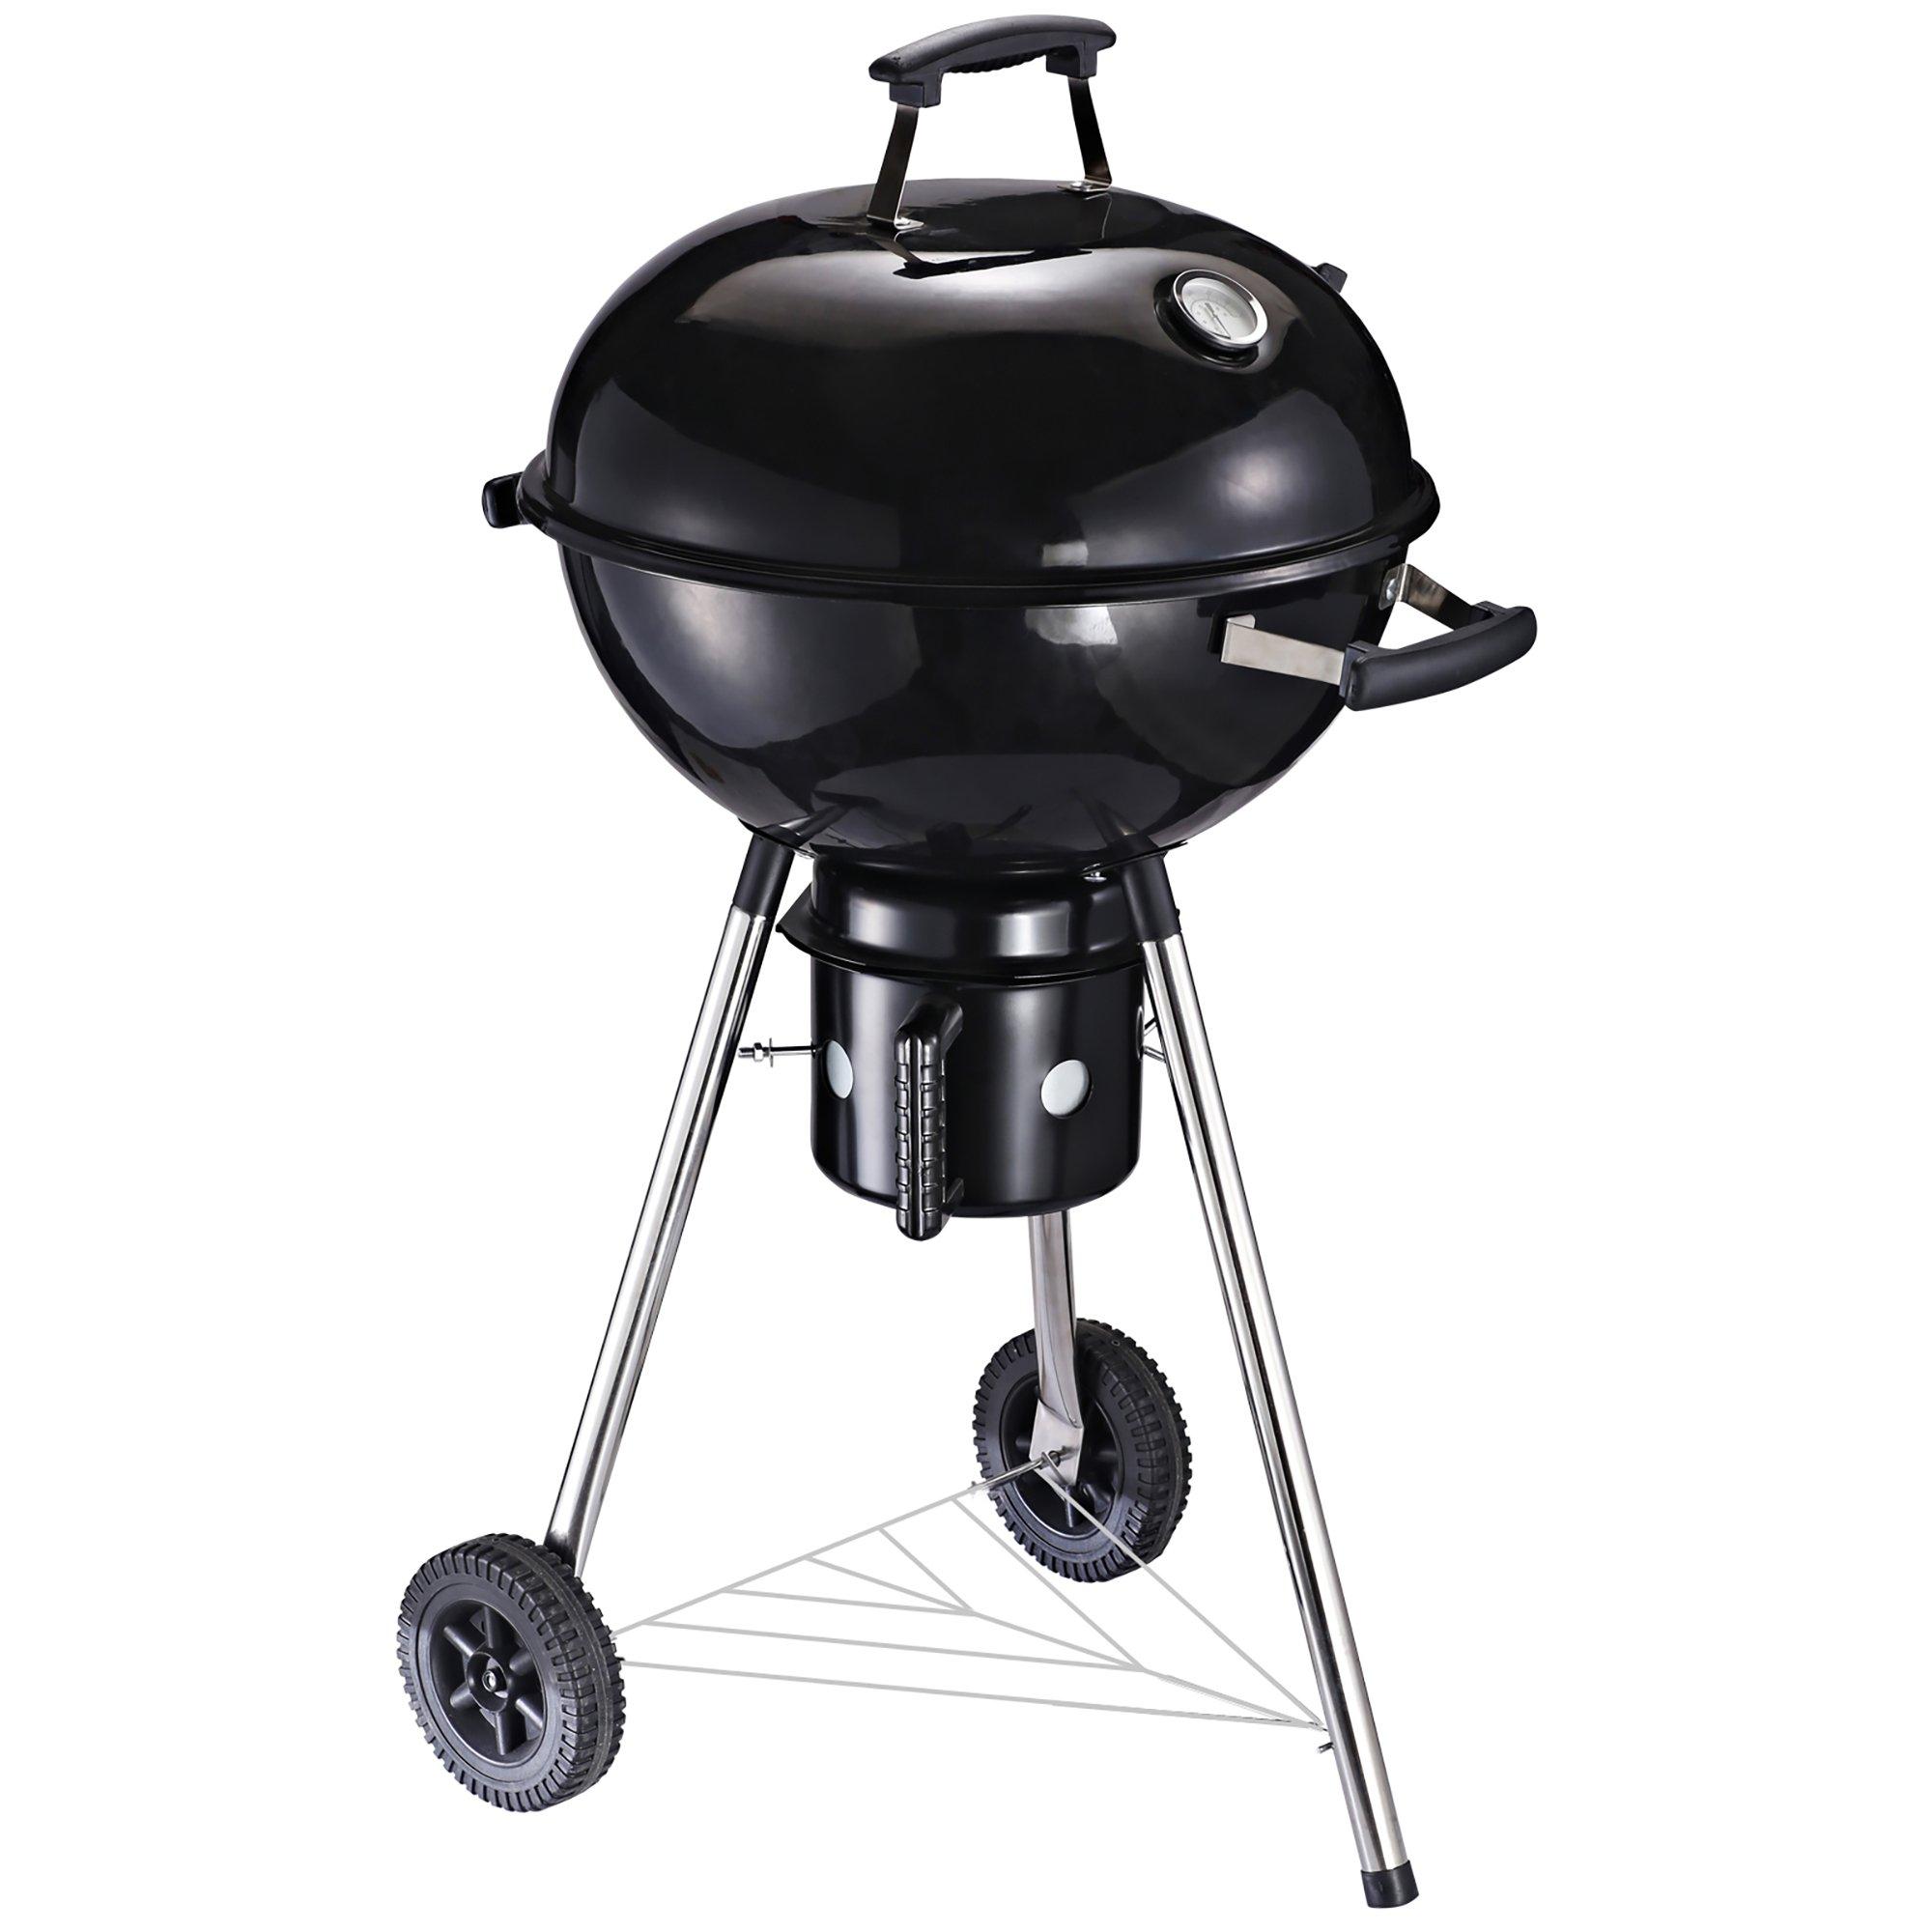 Freestanding Charcoal BBQ Grill Portable Cooking Cooker with Wheels